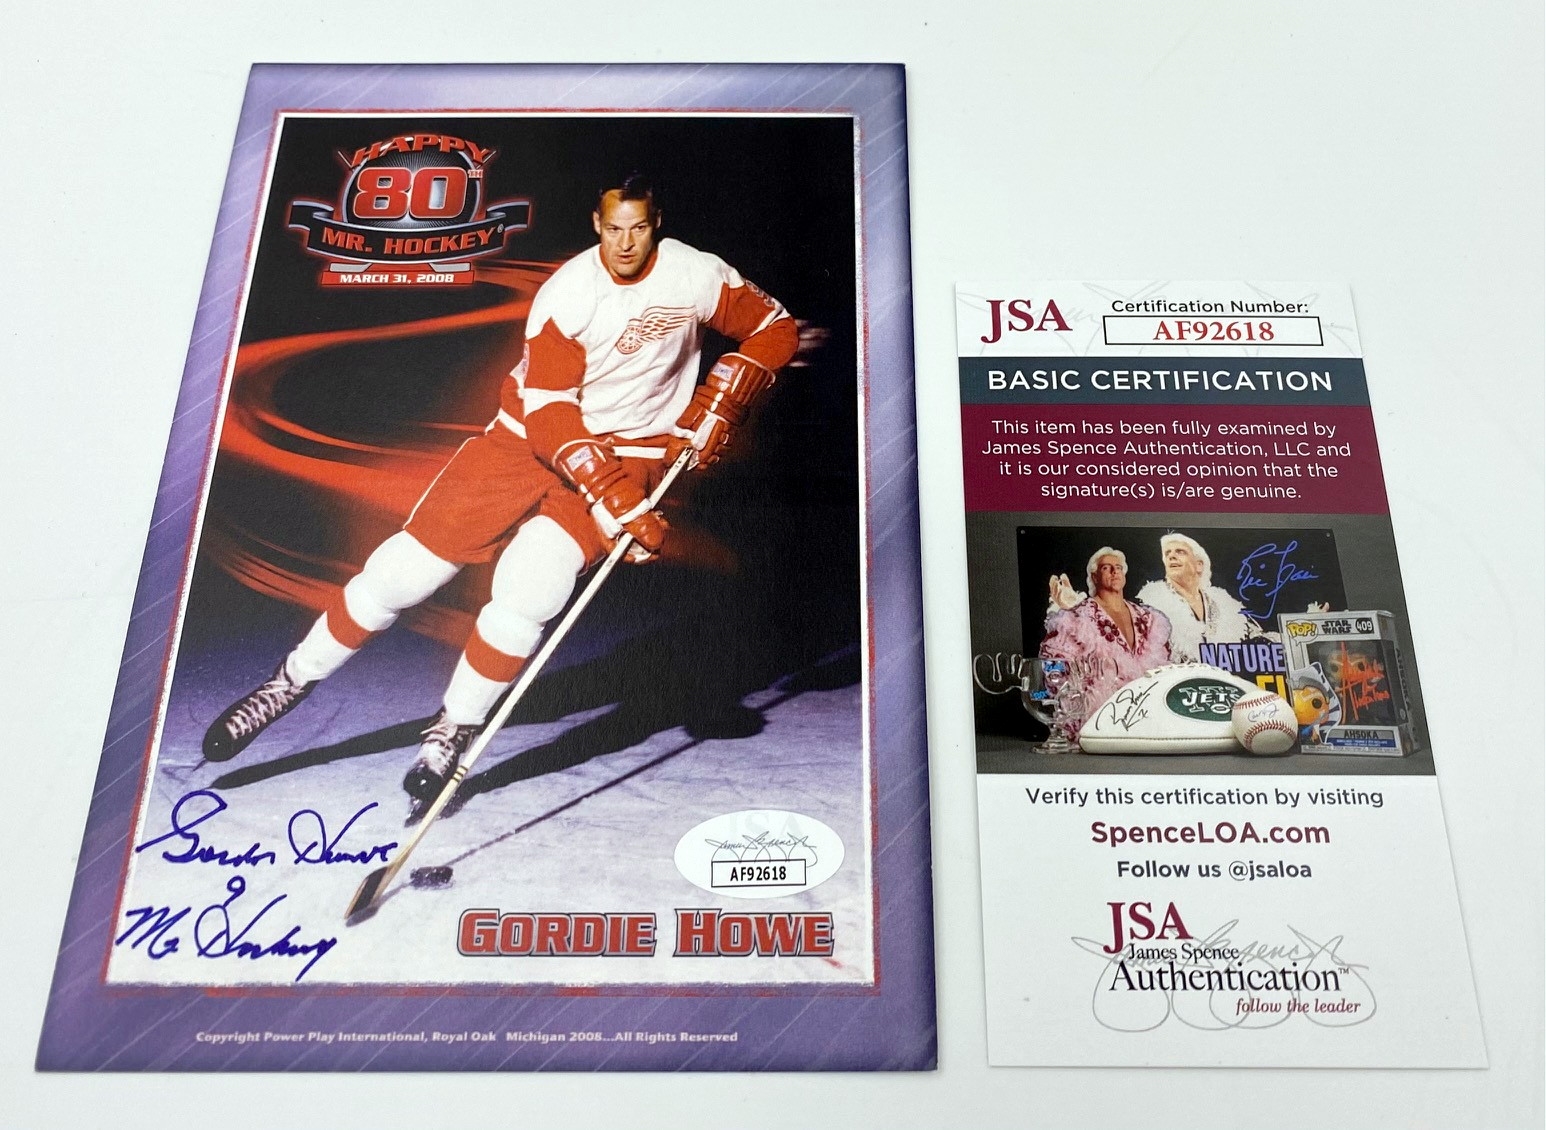 Gordie Howe Detroit Red Wings Signed Happy 80th Birthday 5x7 Photo with Mr Hockey Note - JSA